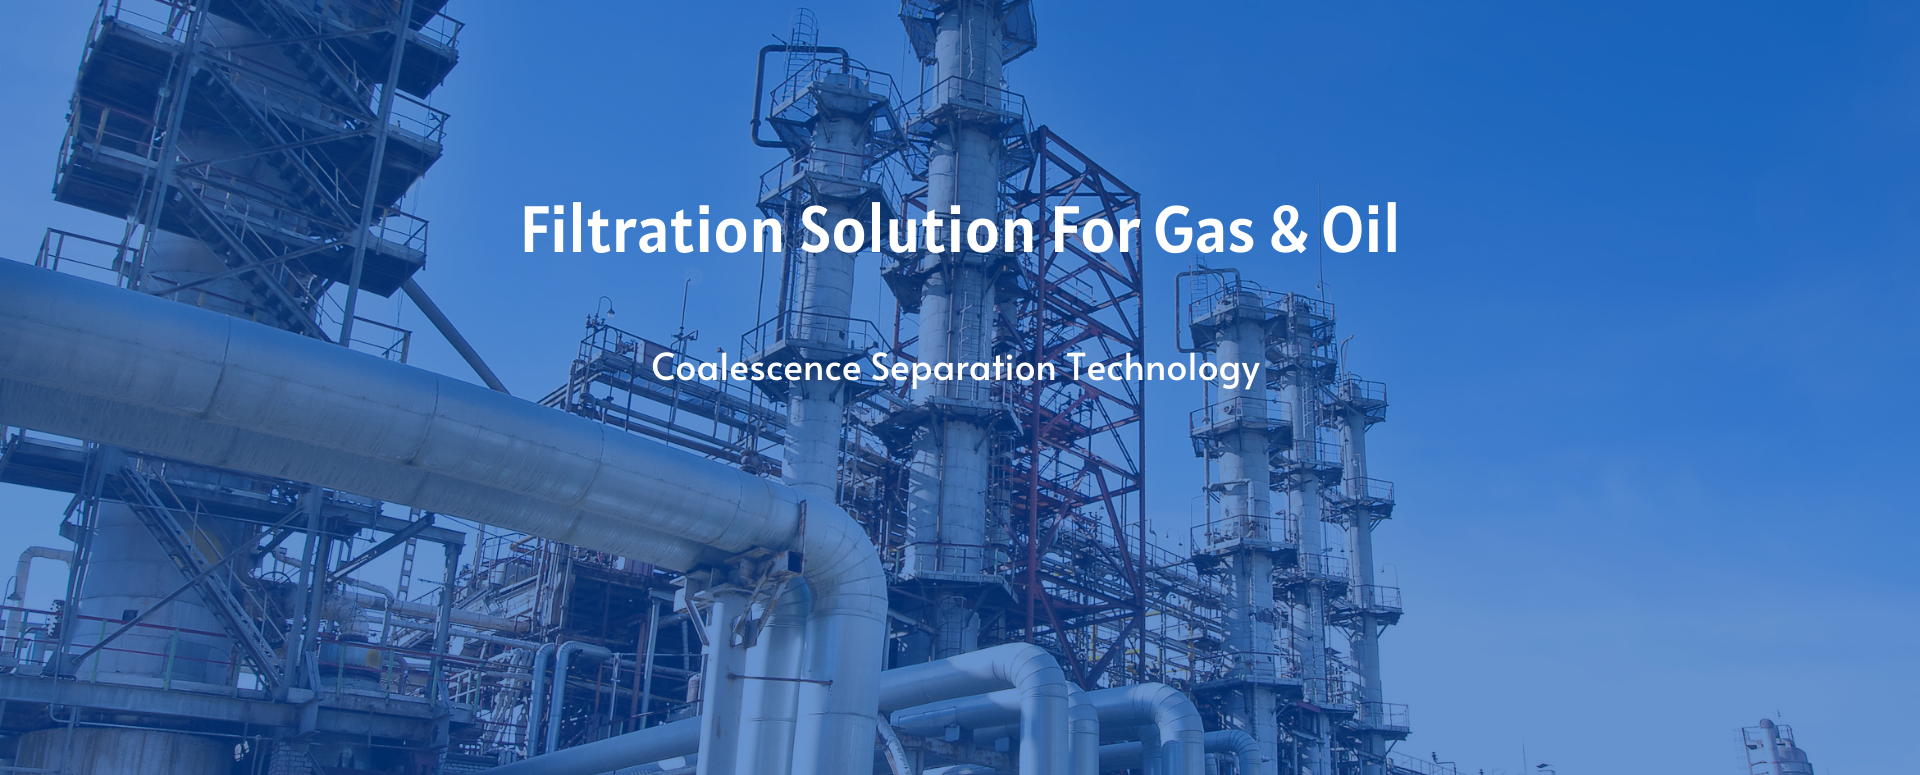 filtration solution for gas & oil